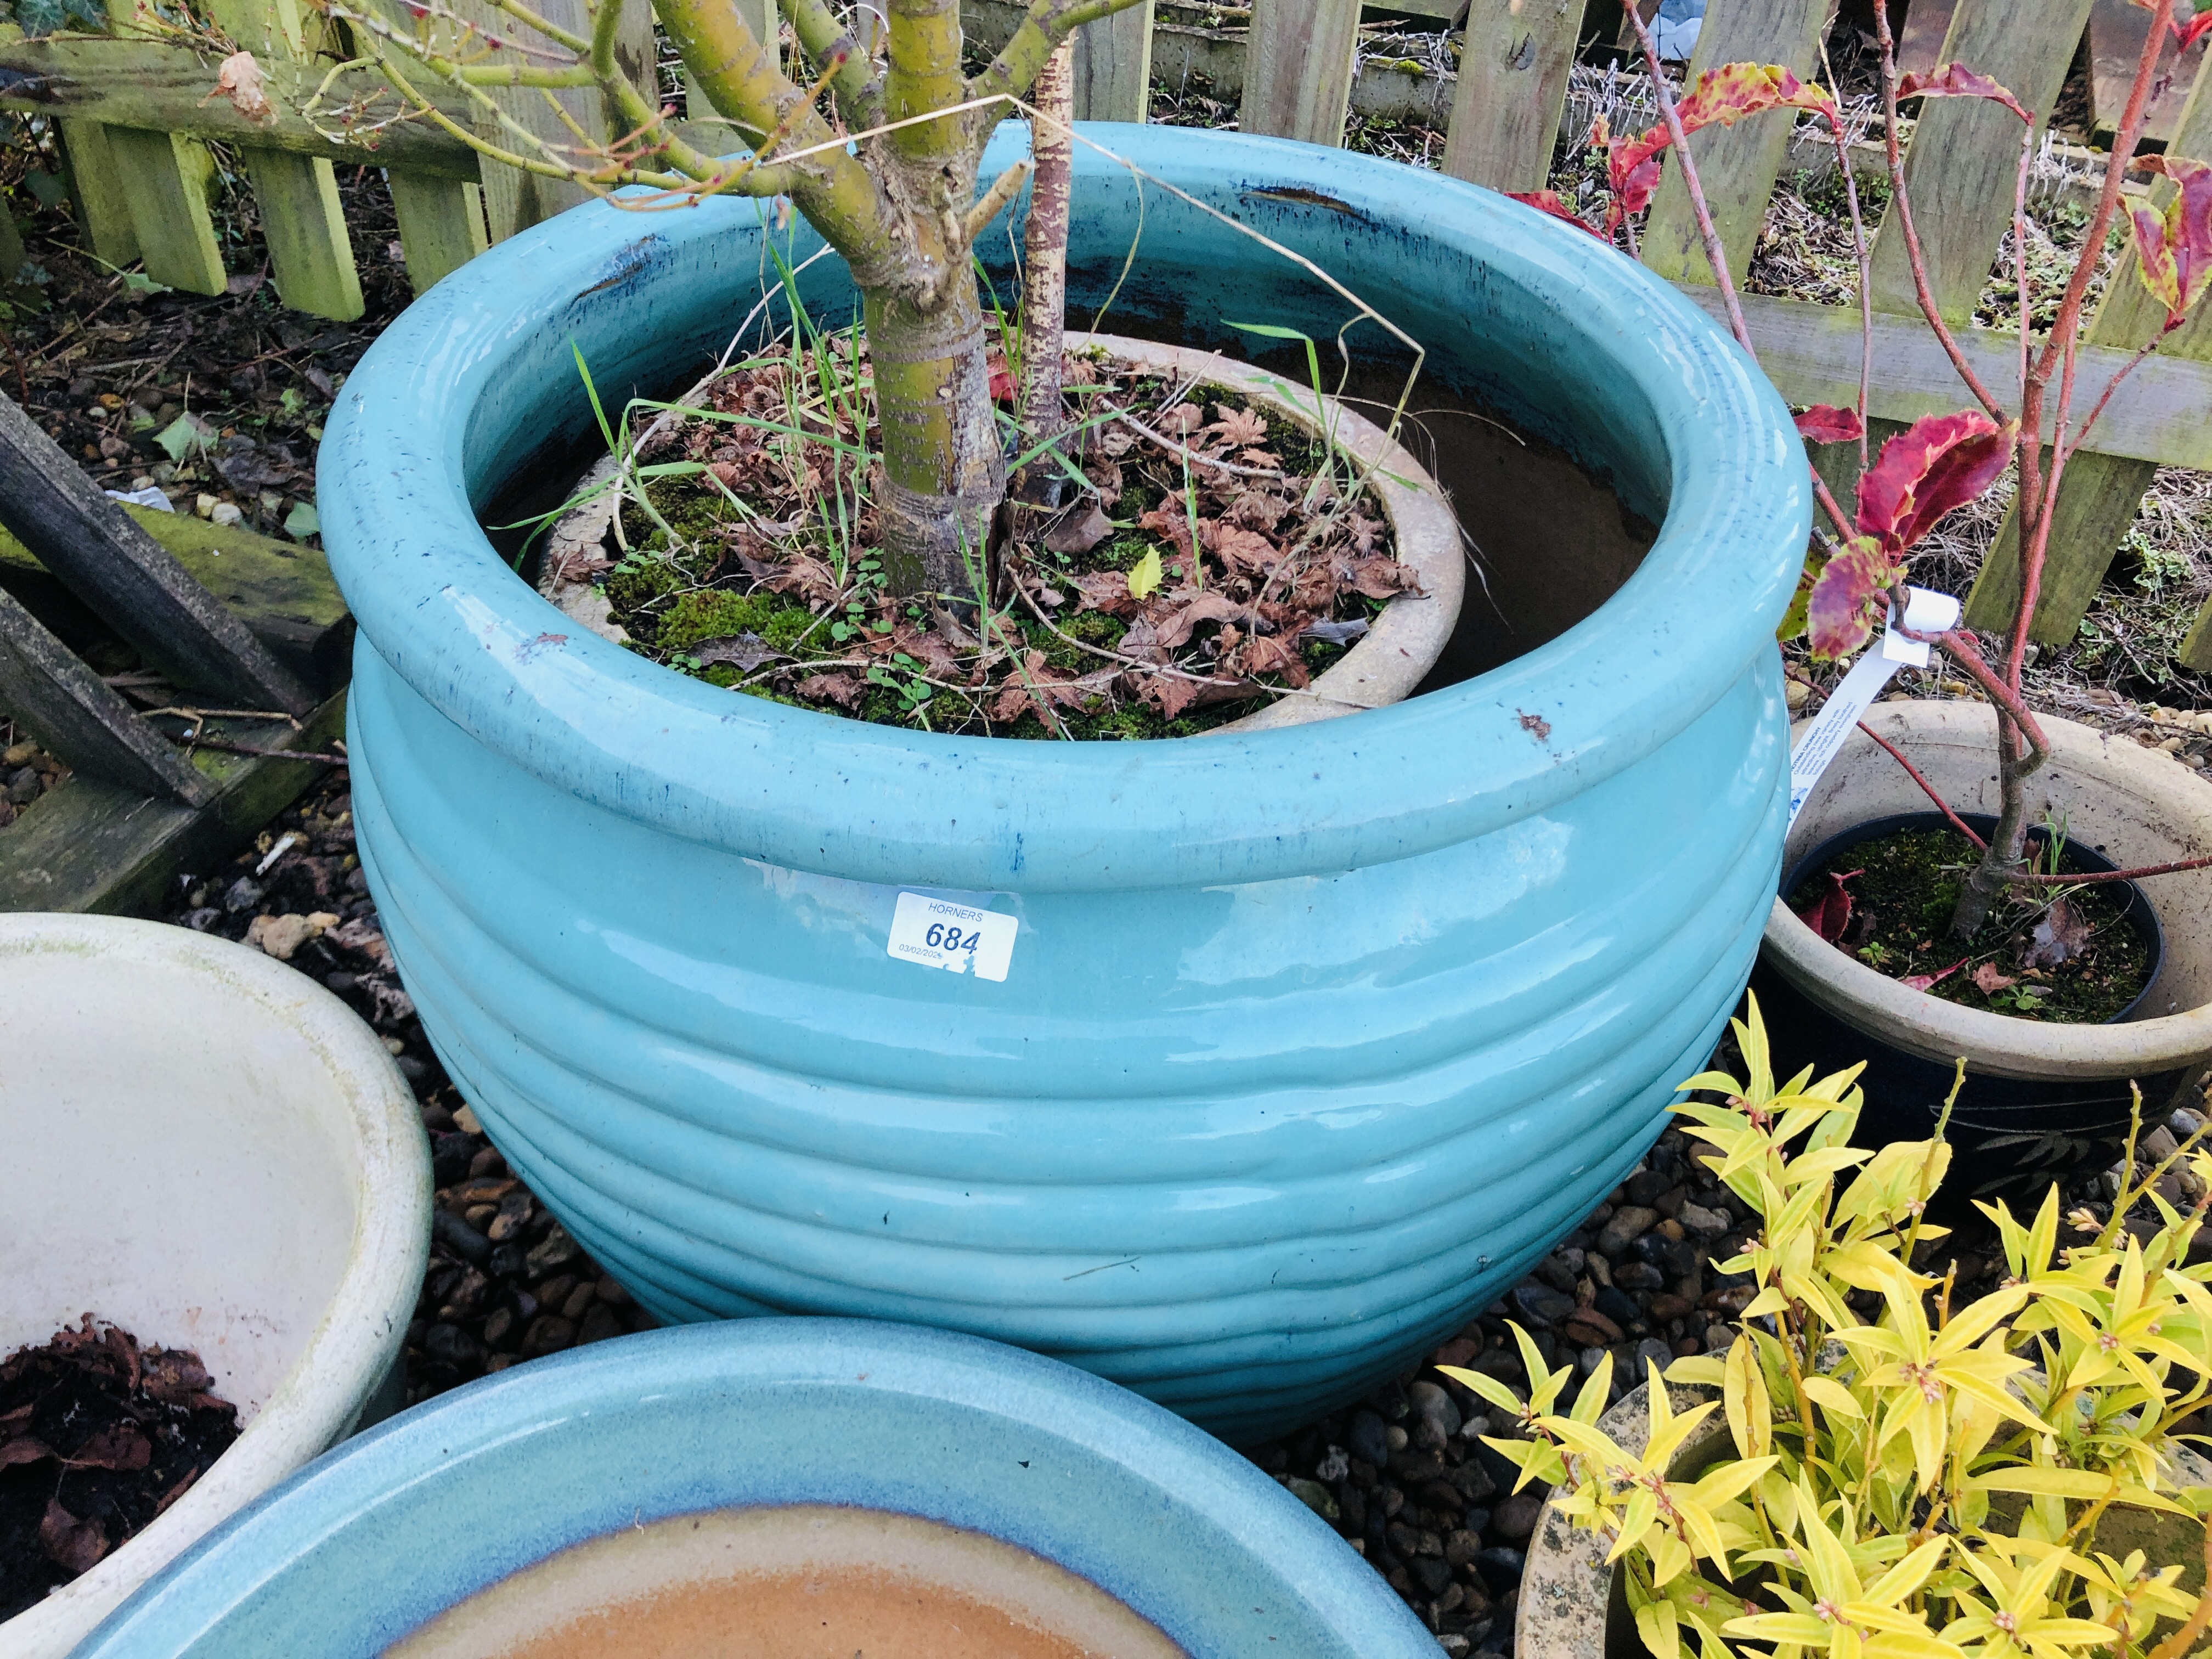 20 GLAZED FLOWER POTS AND PLANTERS AND 3 OTHER PLASTIC POTS CONTAINING PLANTS TO INCLUDE A PHOTINIA - Image 2 of 6